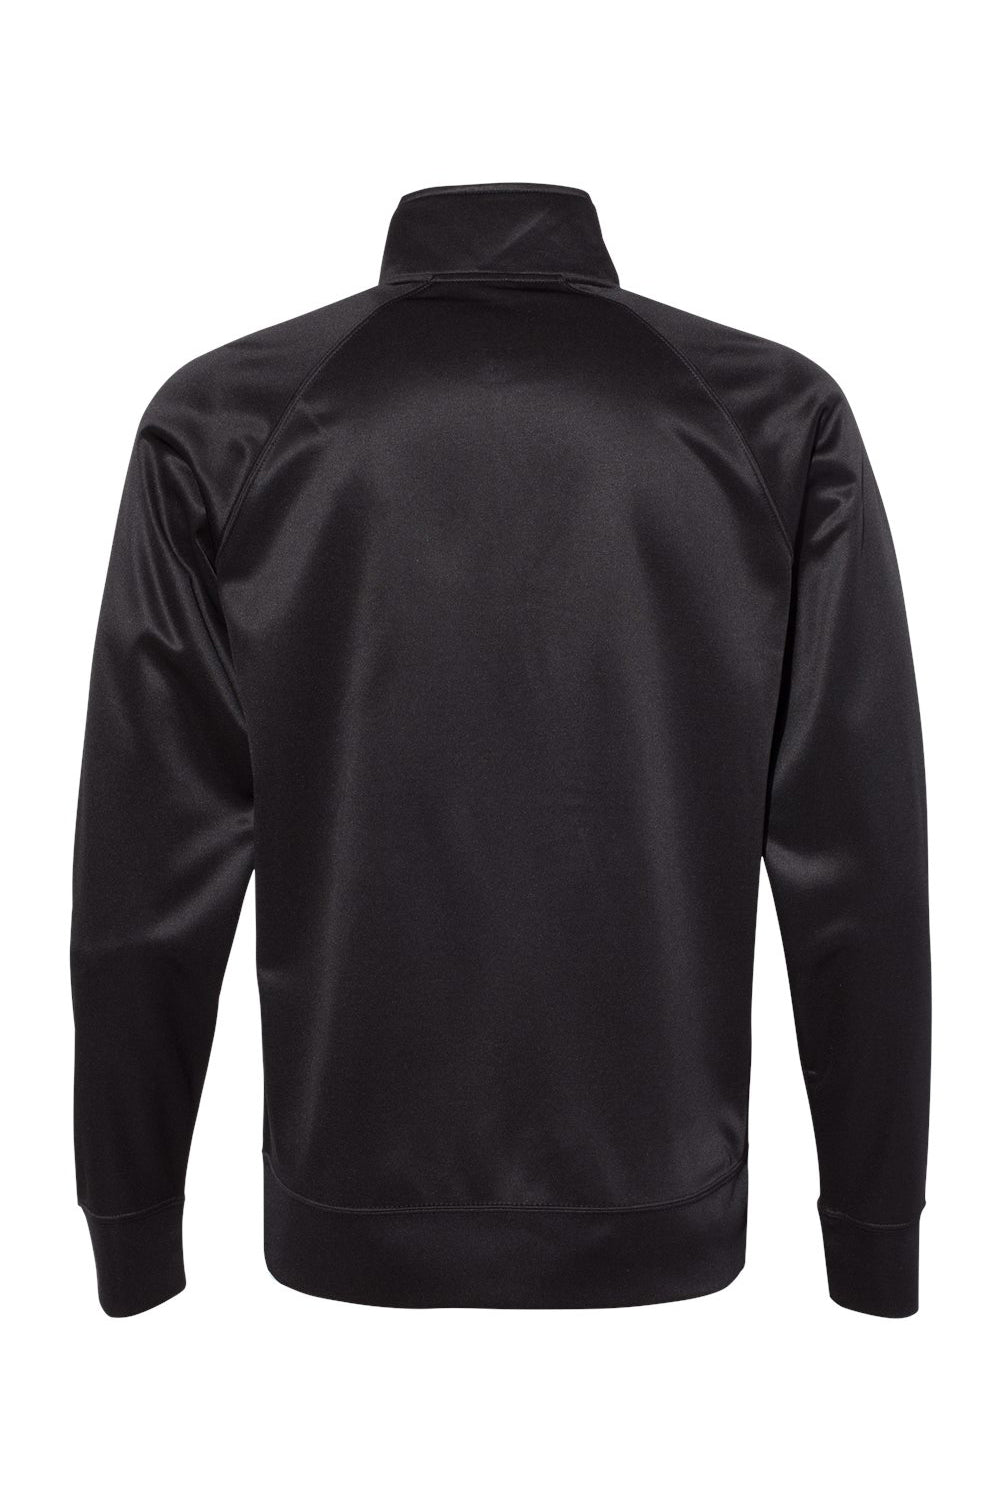 Independent Trading Co. EXP70PTZ Mens Poly Tech Full Zip Track Jacket Black Flat Back